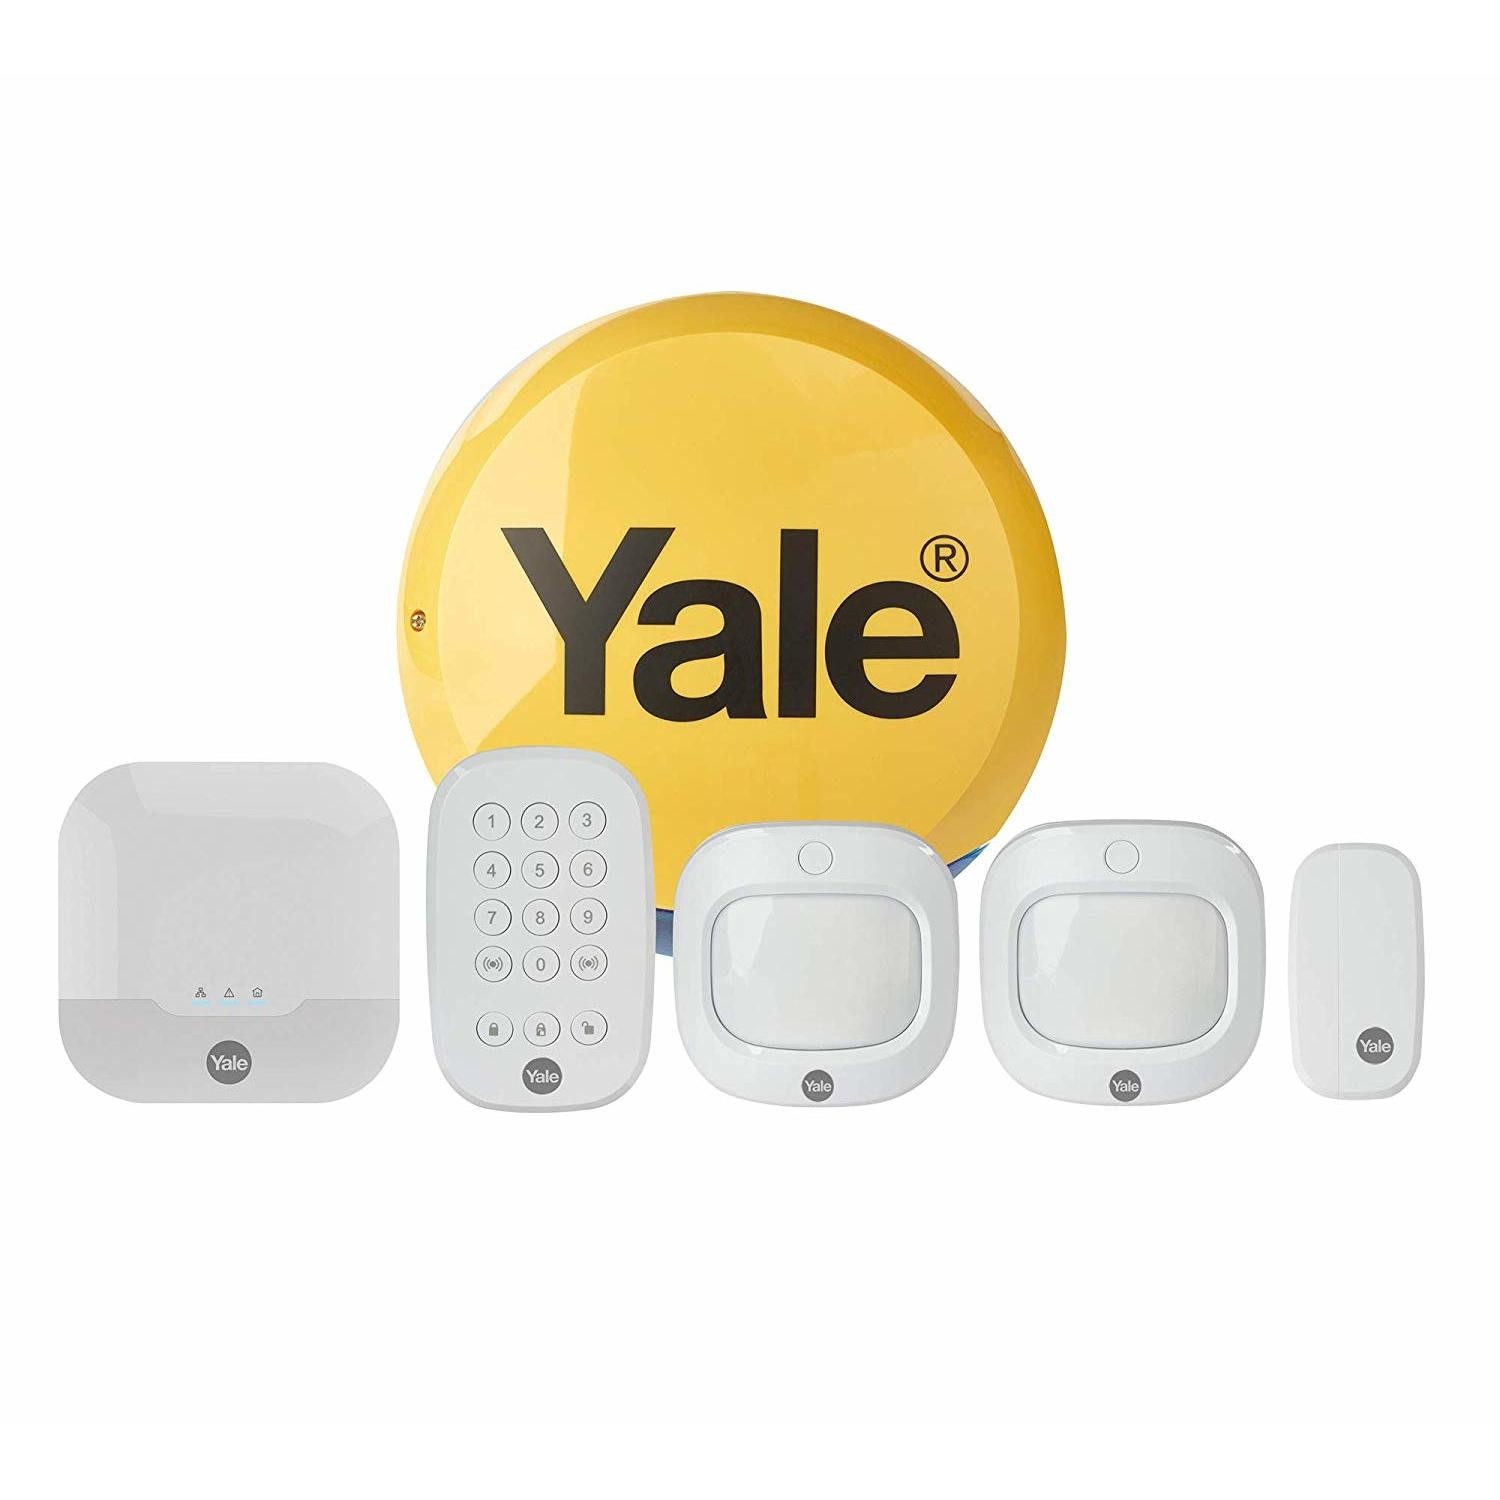 Yale Sync Smart Home Alarm Family Kit - works with Alexa